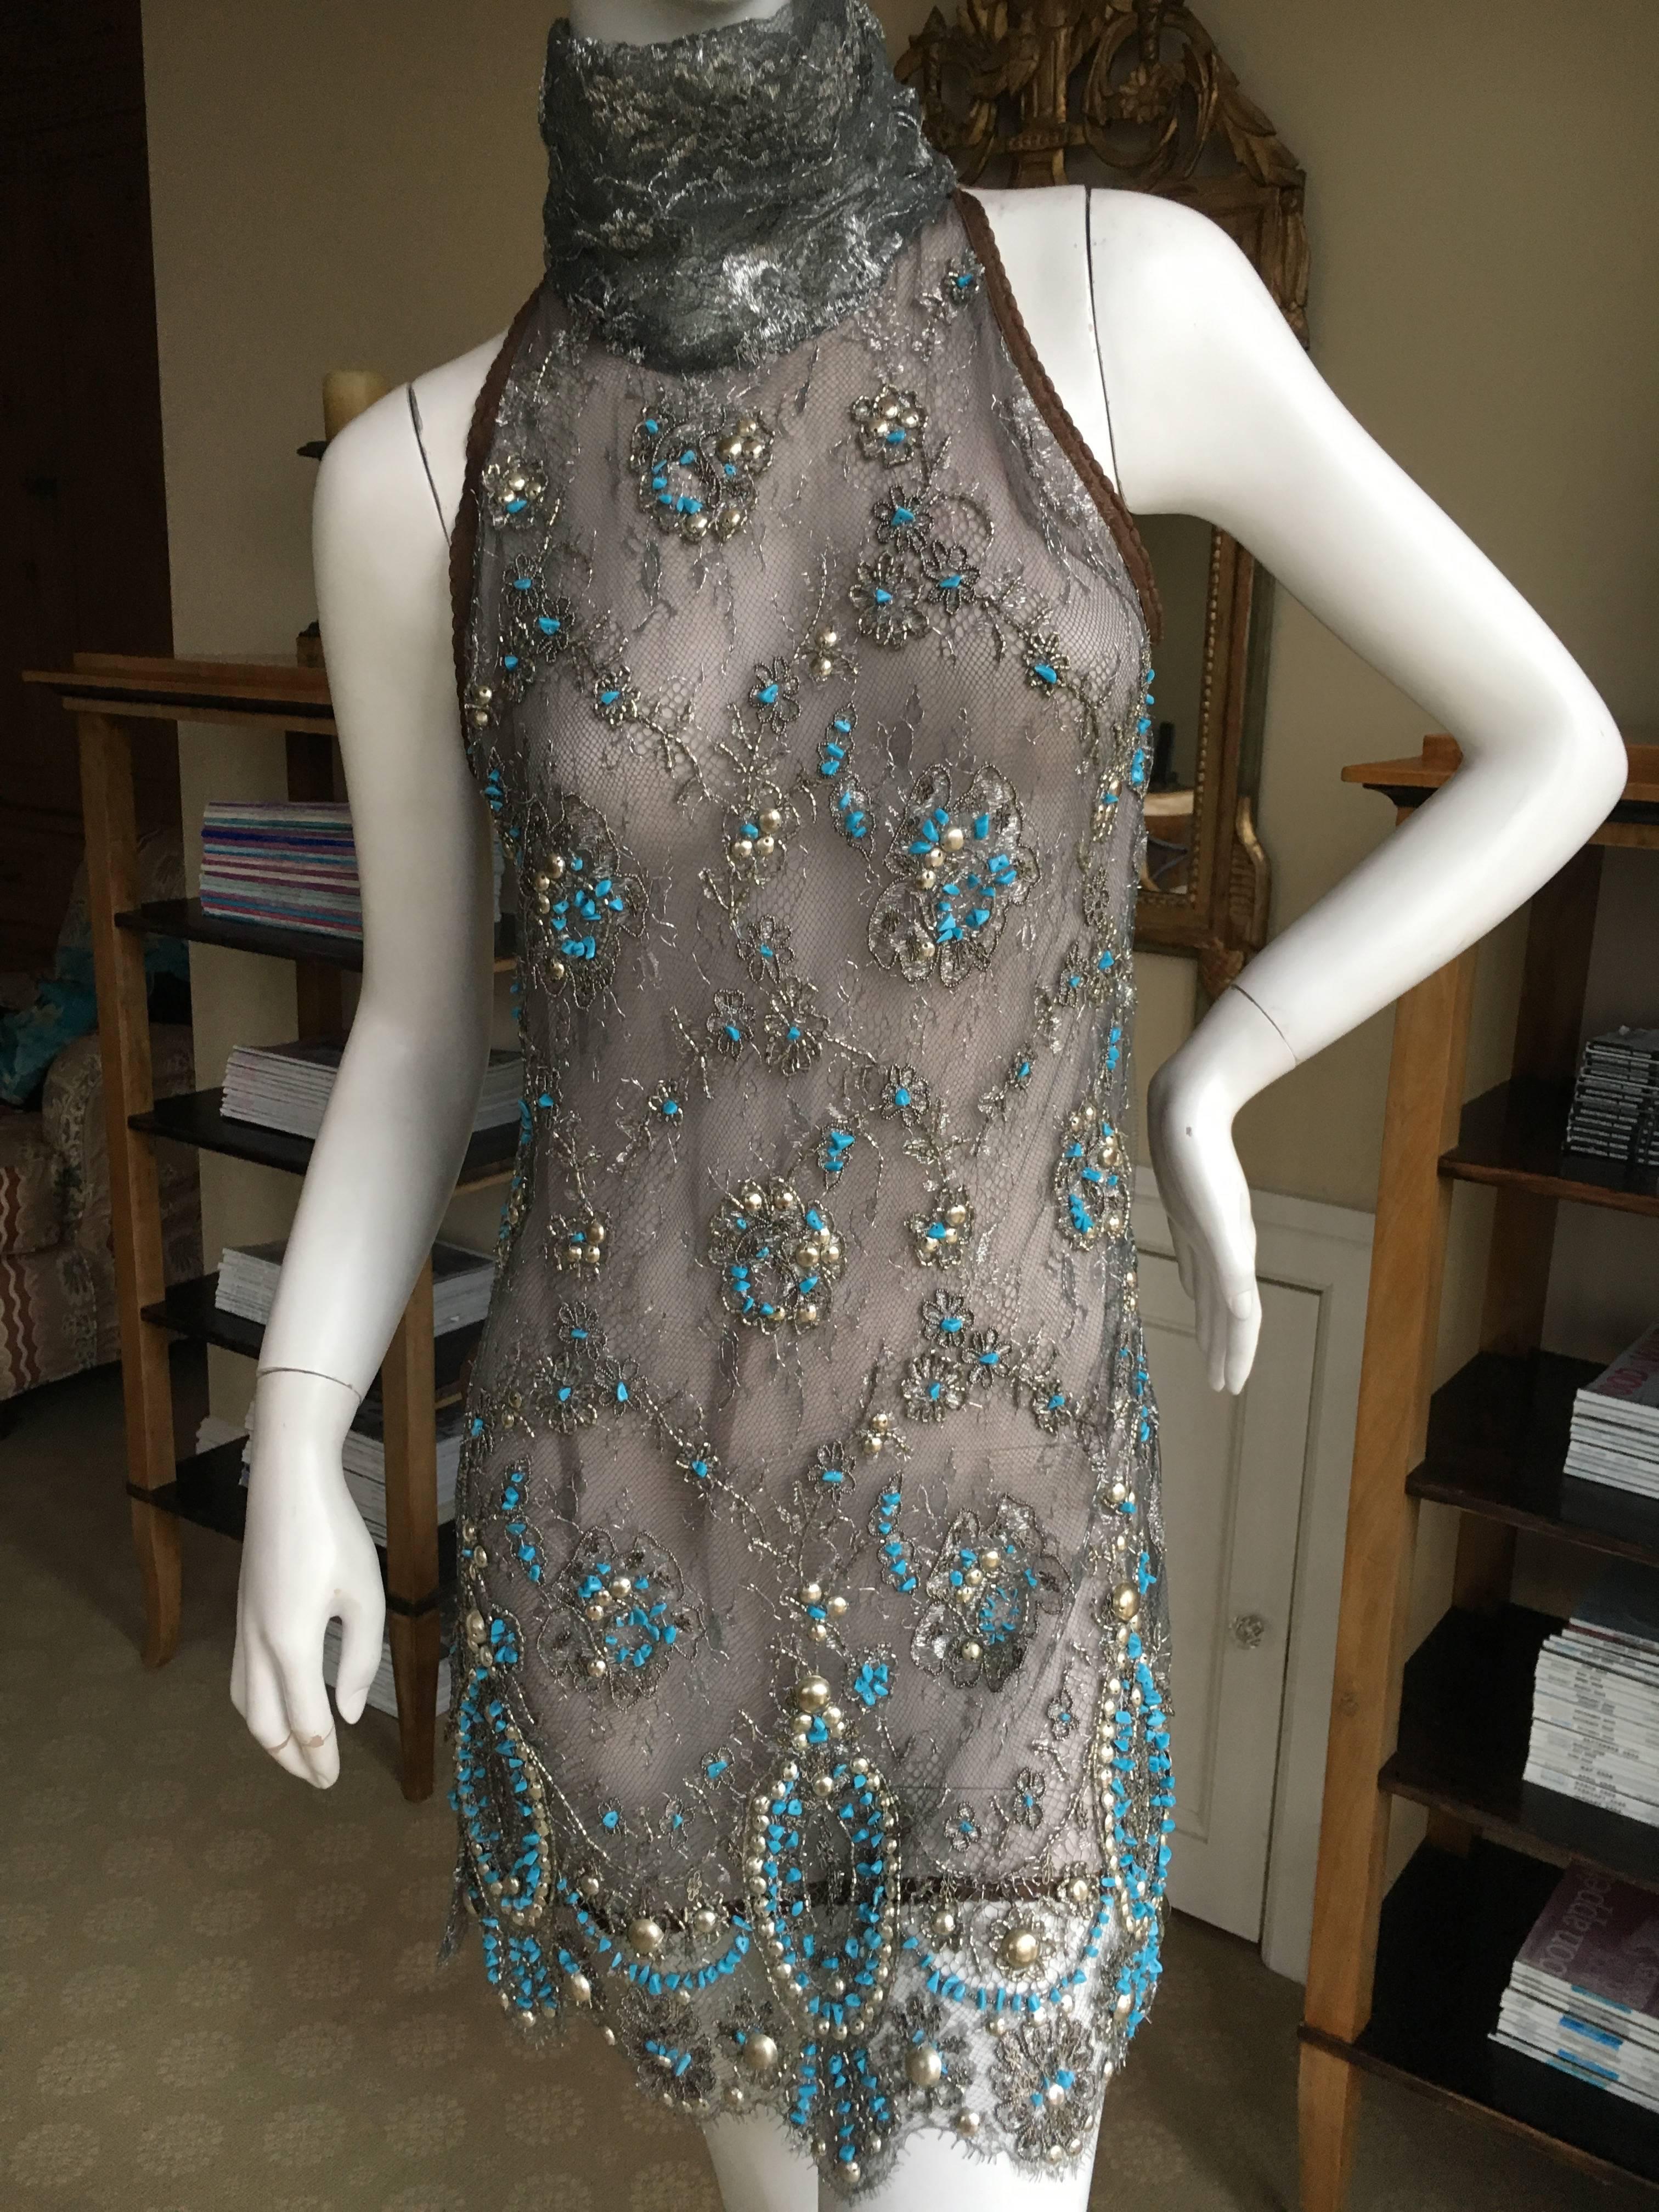 Exquisite lace tunic top from Gianfranco Ferre.
Please look at the close ups, the hand embellishments are couture quality.
Size 40
Bust 38